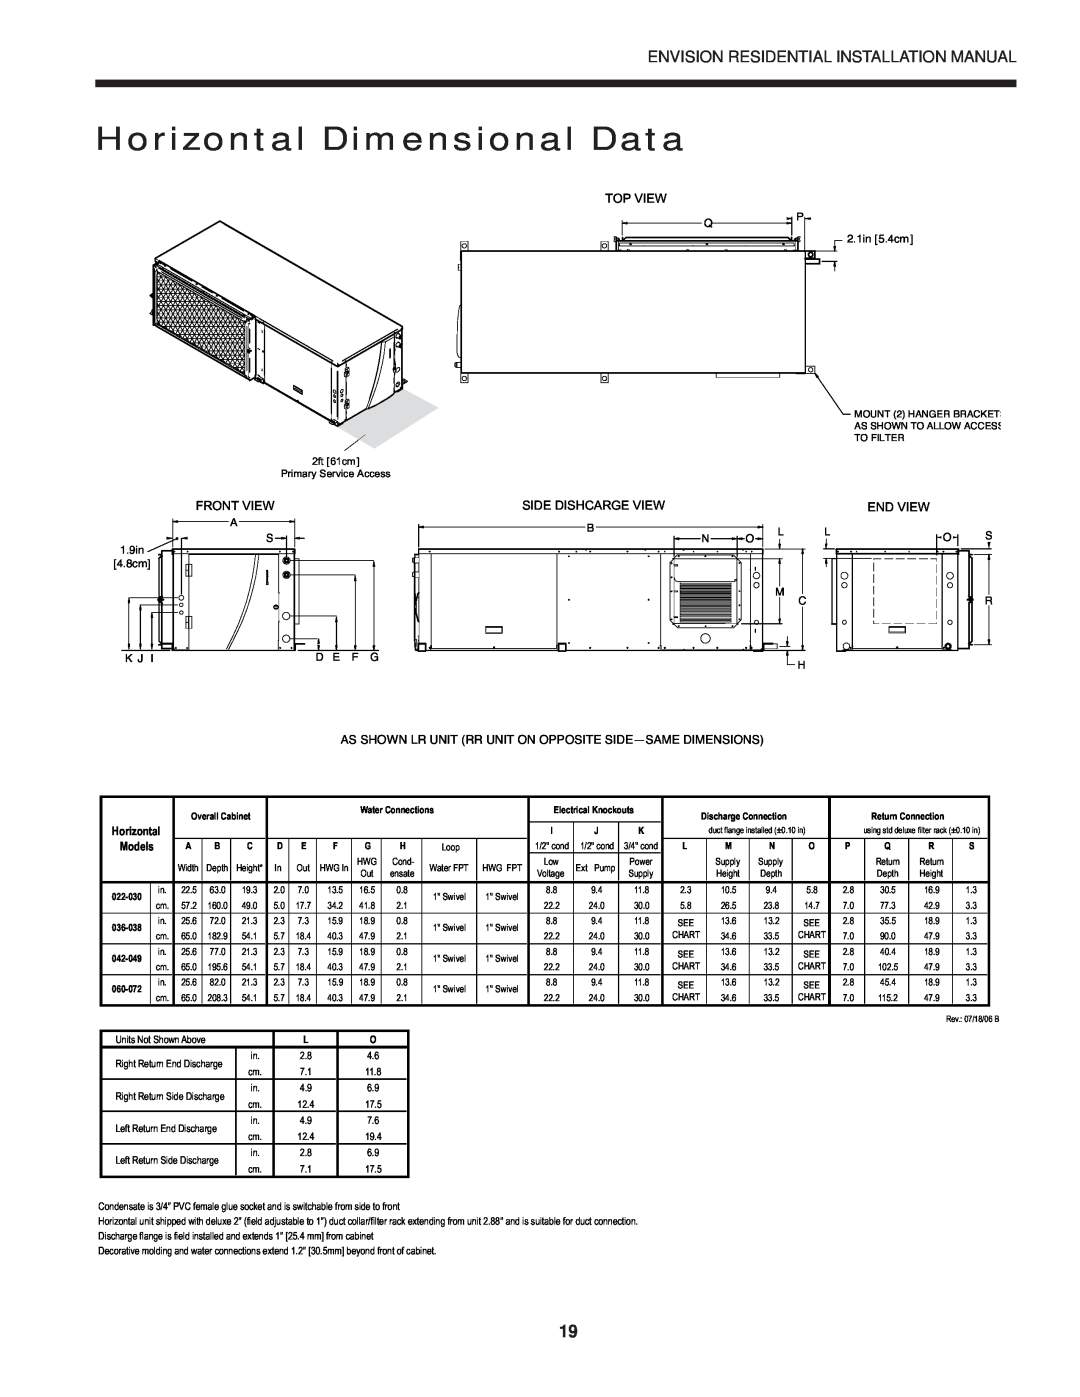 Envision Peripherals R-410A Horizontal Dimensional Data, Top View, Front View, Side Dishcarge View, End View, Models 